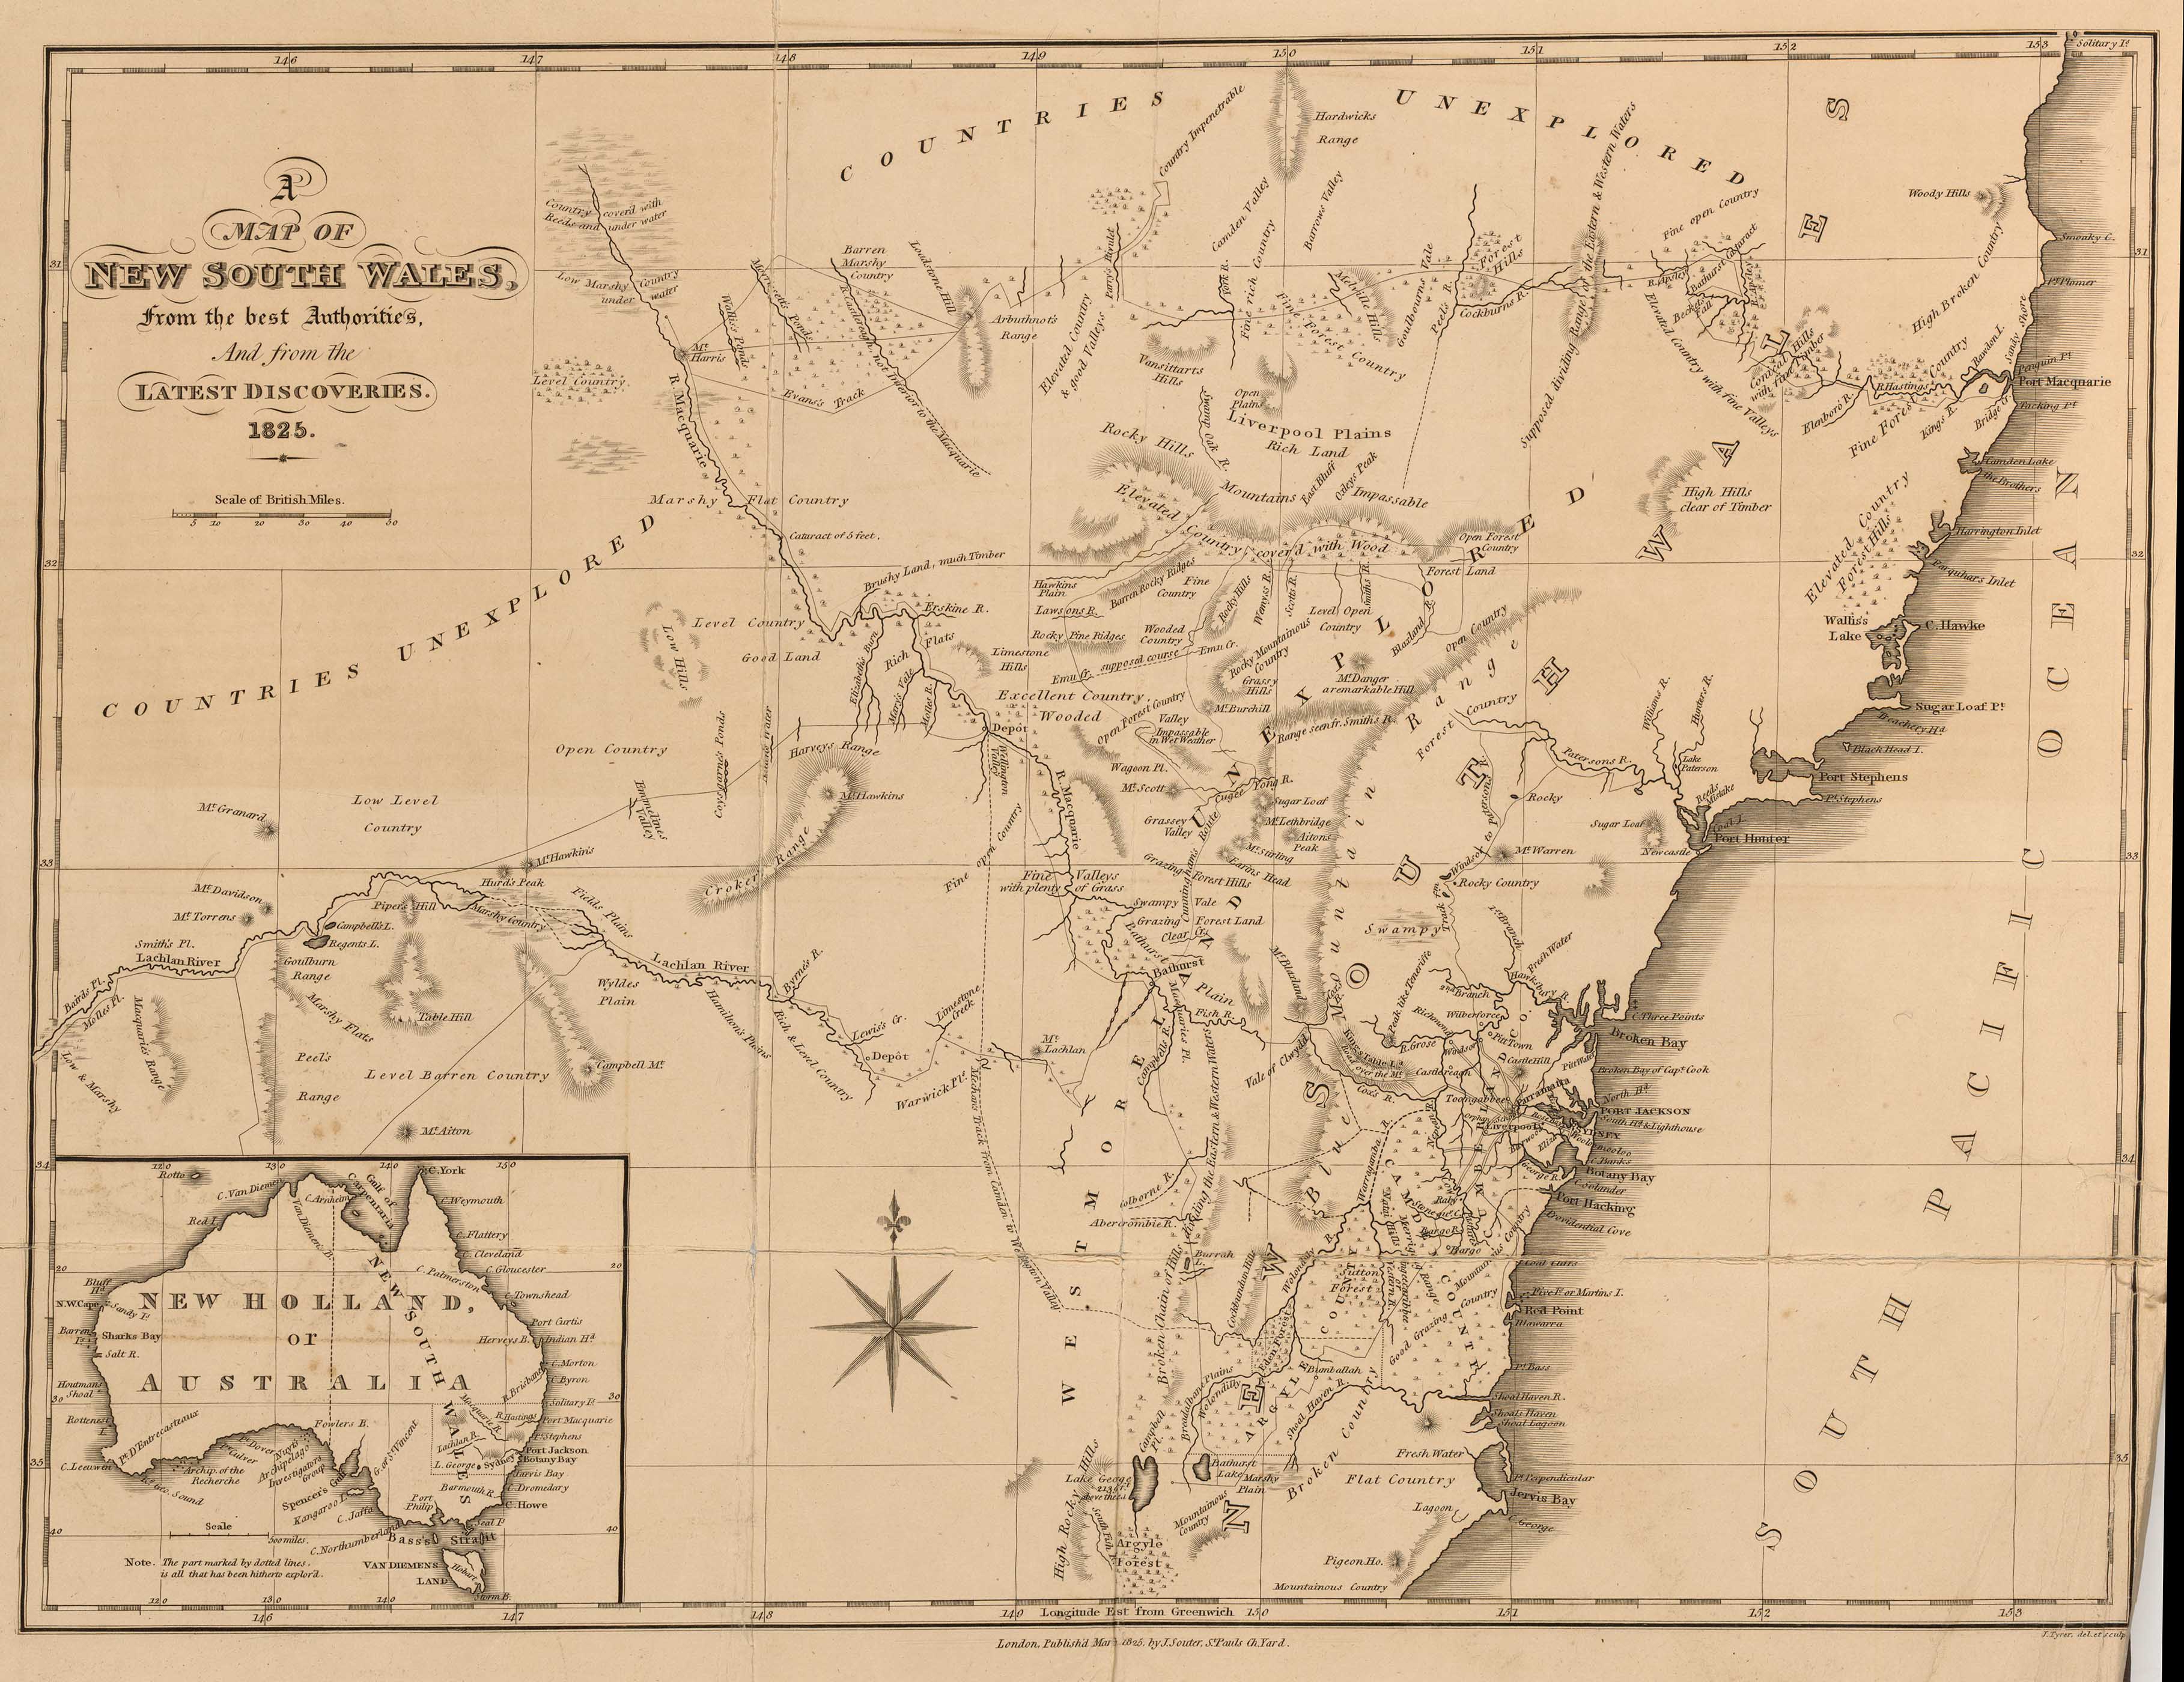 A map of New South Wales, 1825
